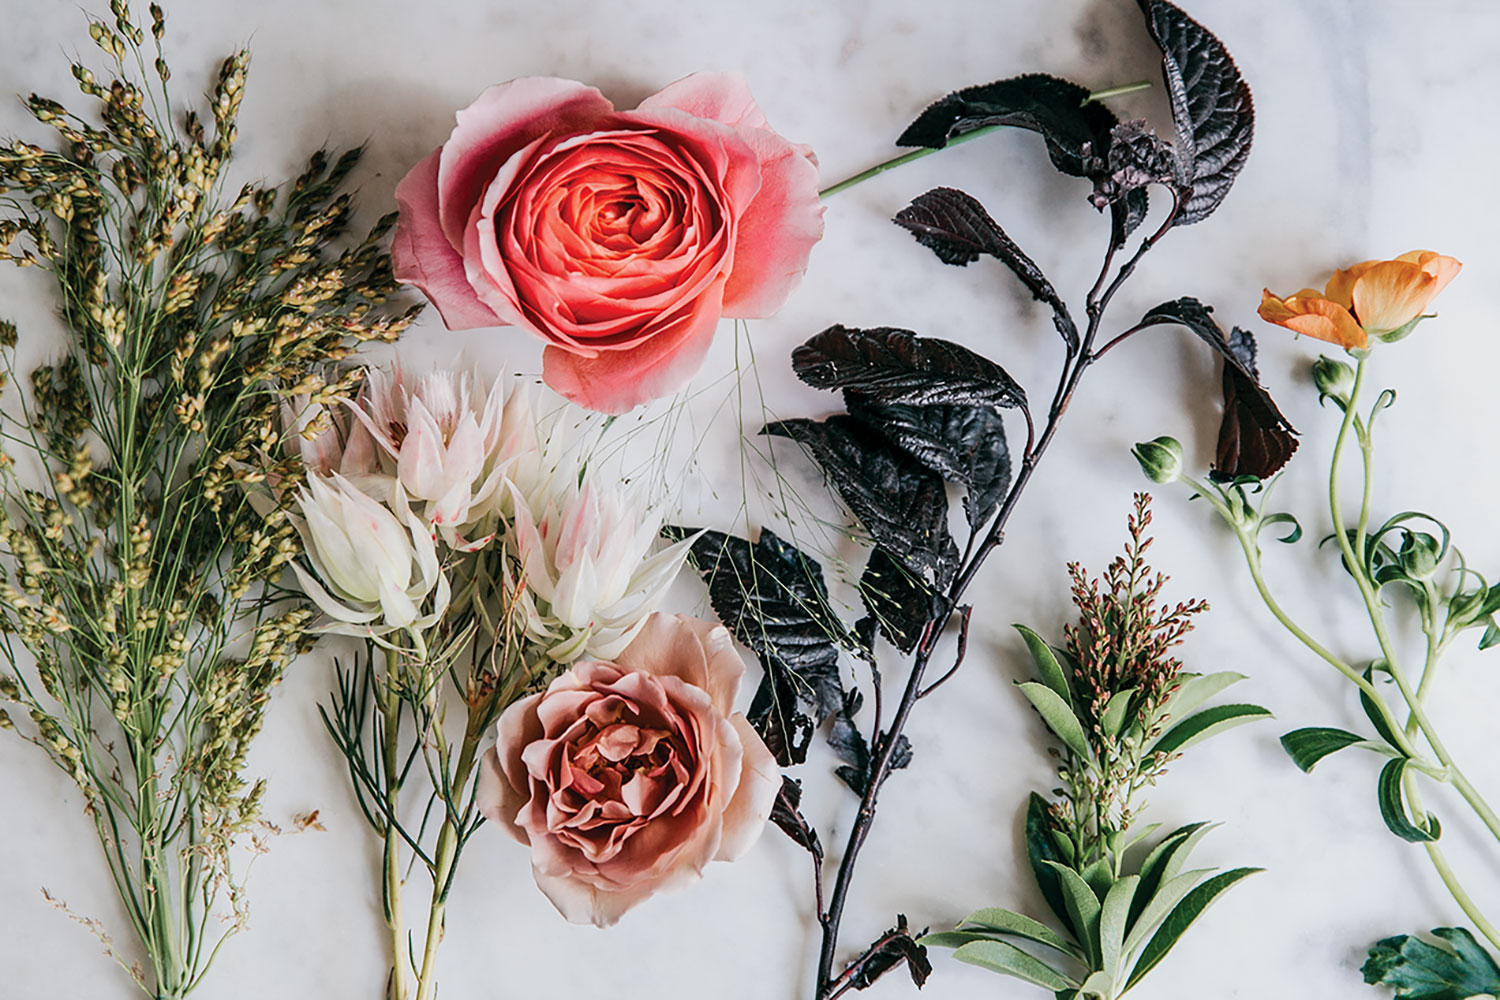 The materials are laid out on a flat white surface: Pieris japonica, Plum tree foliage, Bridal veil grass , Millet grass, Explosion grass, ‘Blushing Bride’ protea‘, Prairie Sunset’ roses, ‘Romantic Antike’ roses, ‘Koko Loko’ roses, ‘Butterfly’ ranunculus